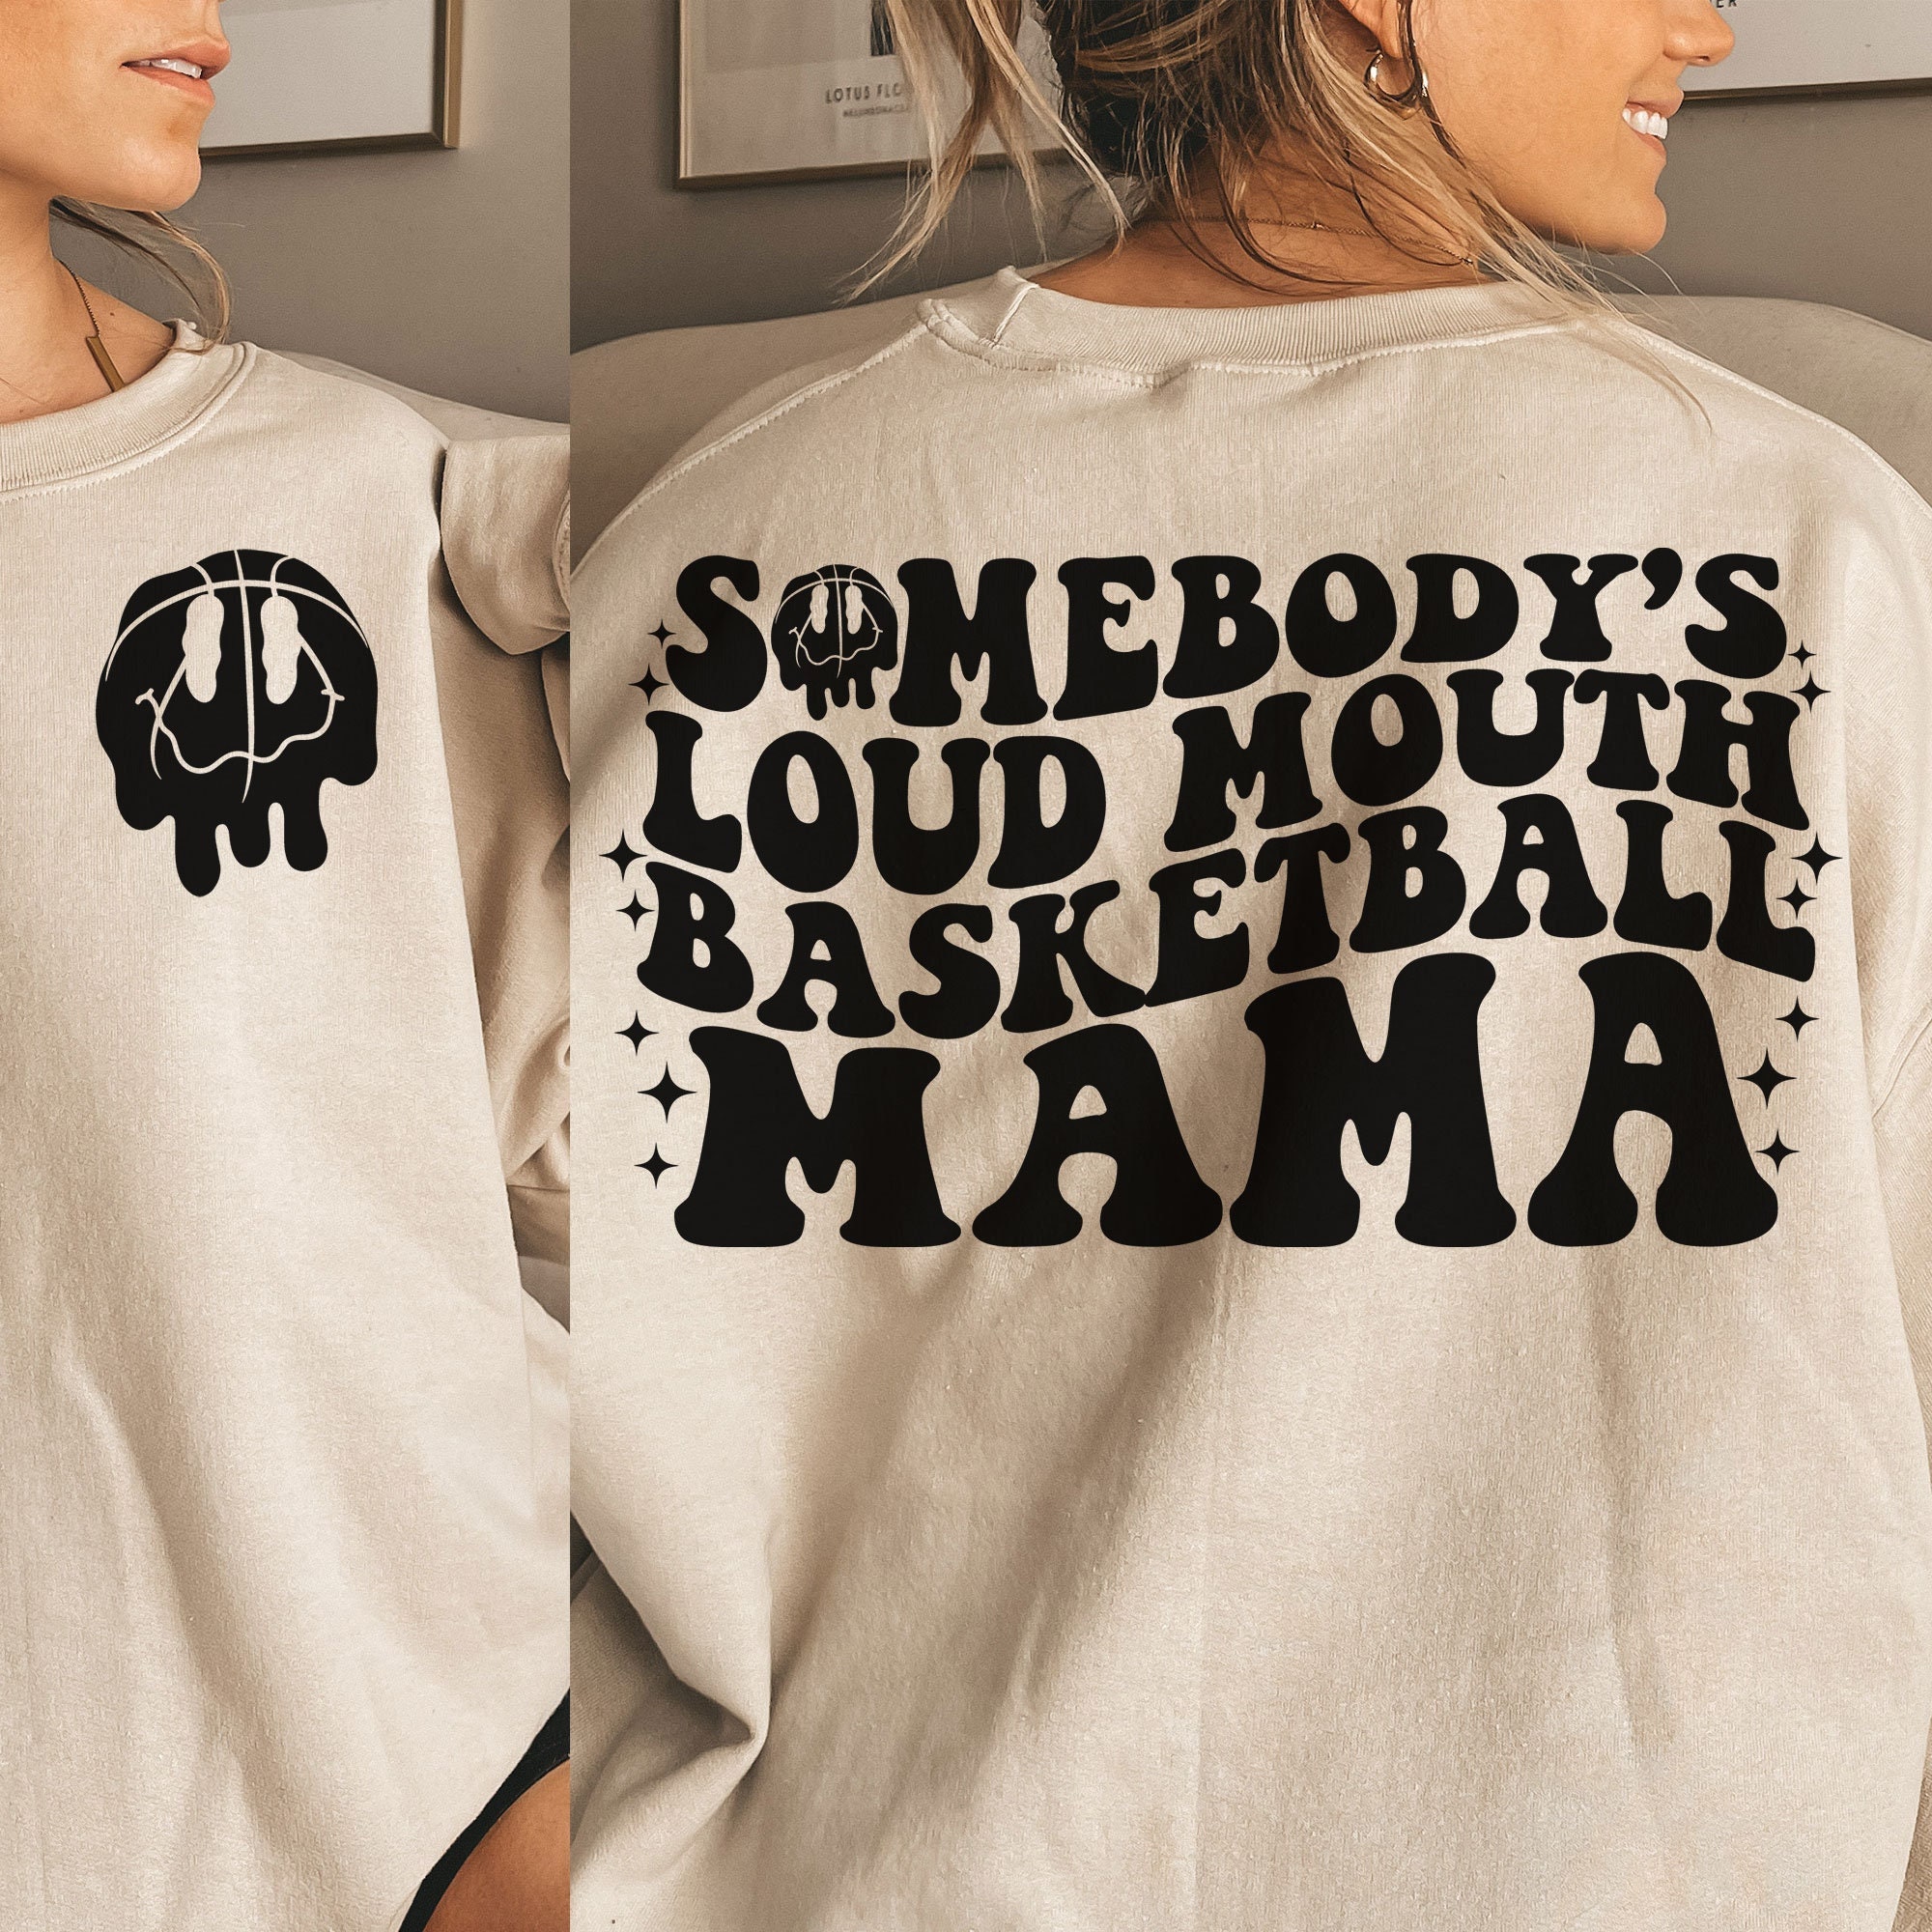 Somebody's Loud MOUTH Basketball Mama Melting Smile Png/svg - Front And ...